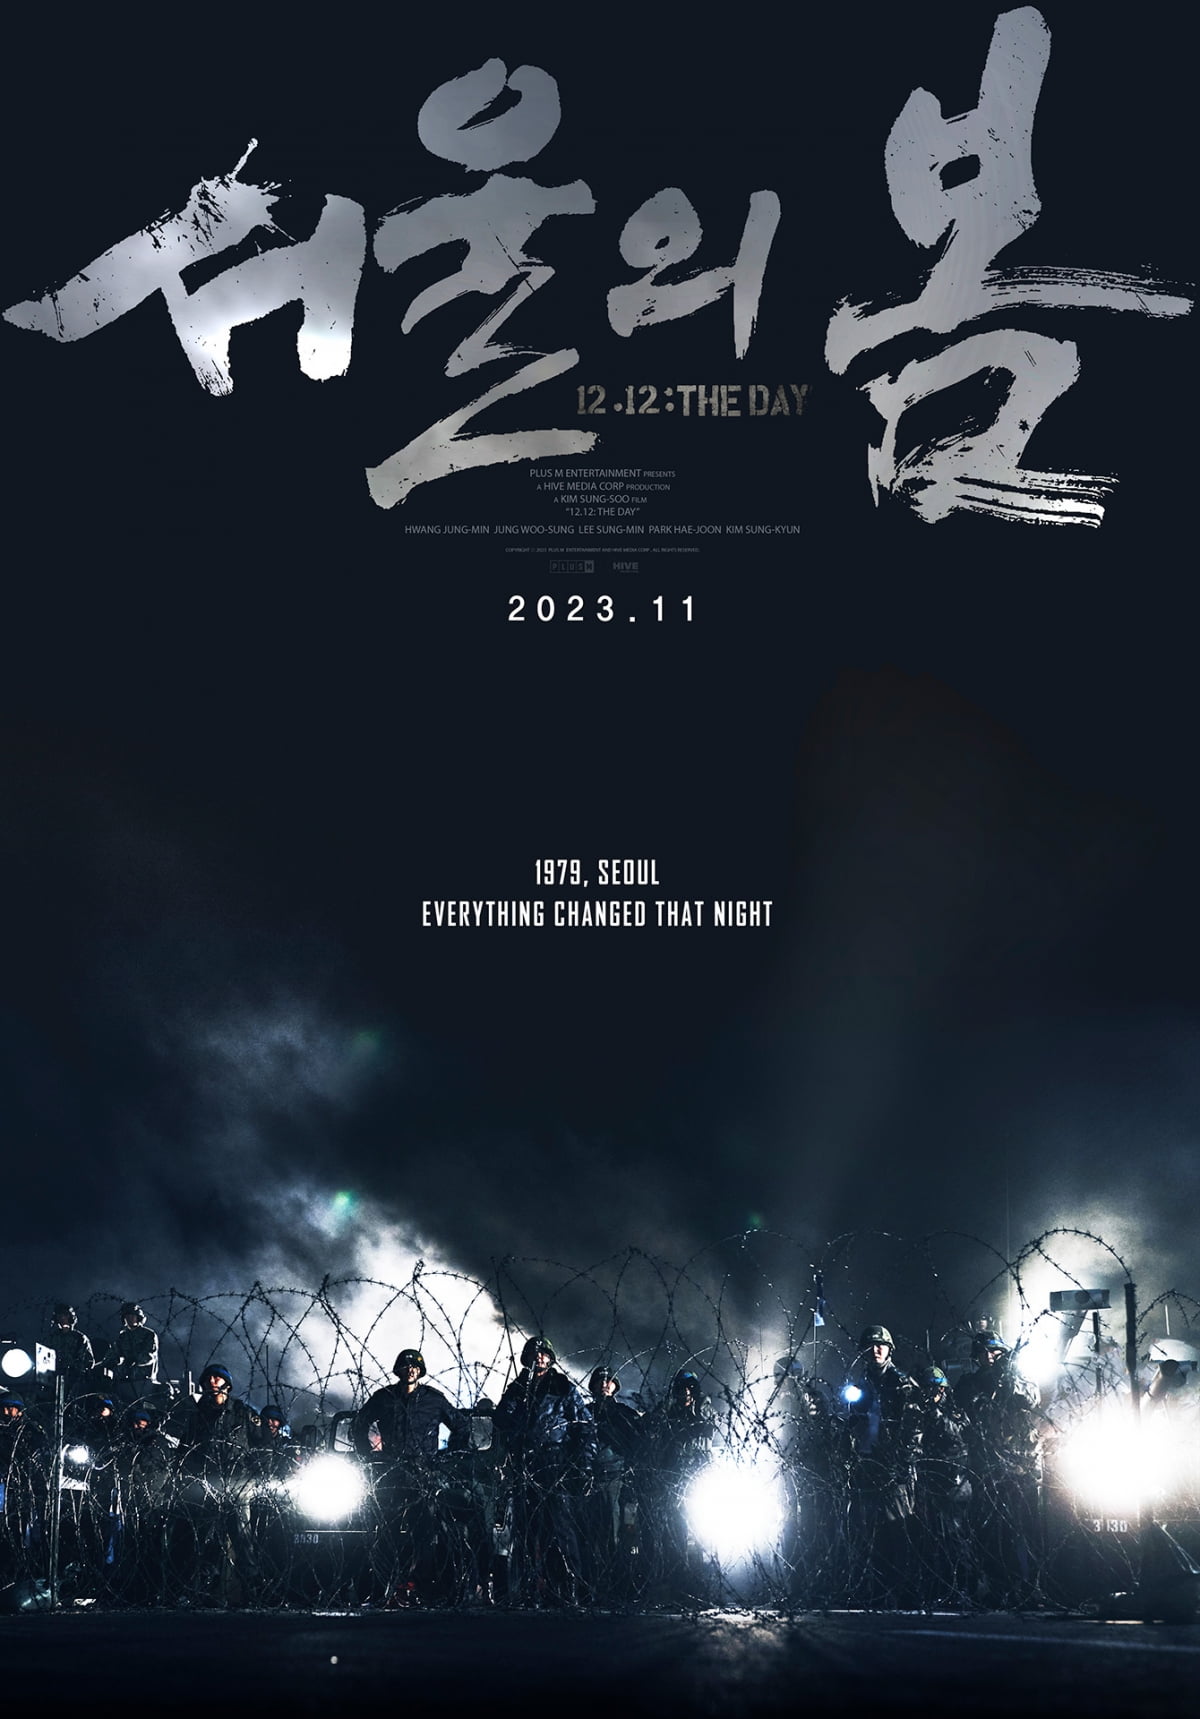 The movie ‘Spring in Seoul’ deals with the imminent situation during the December 12 military uprising.